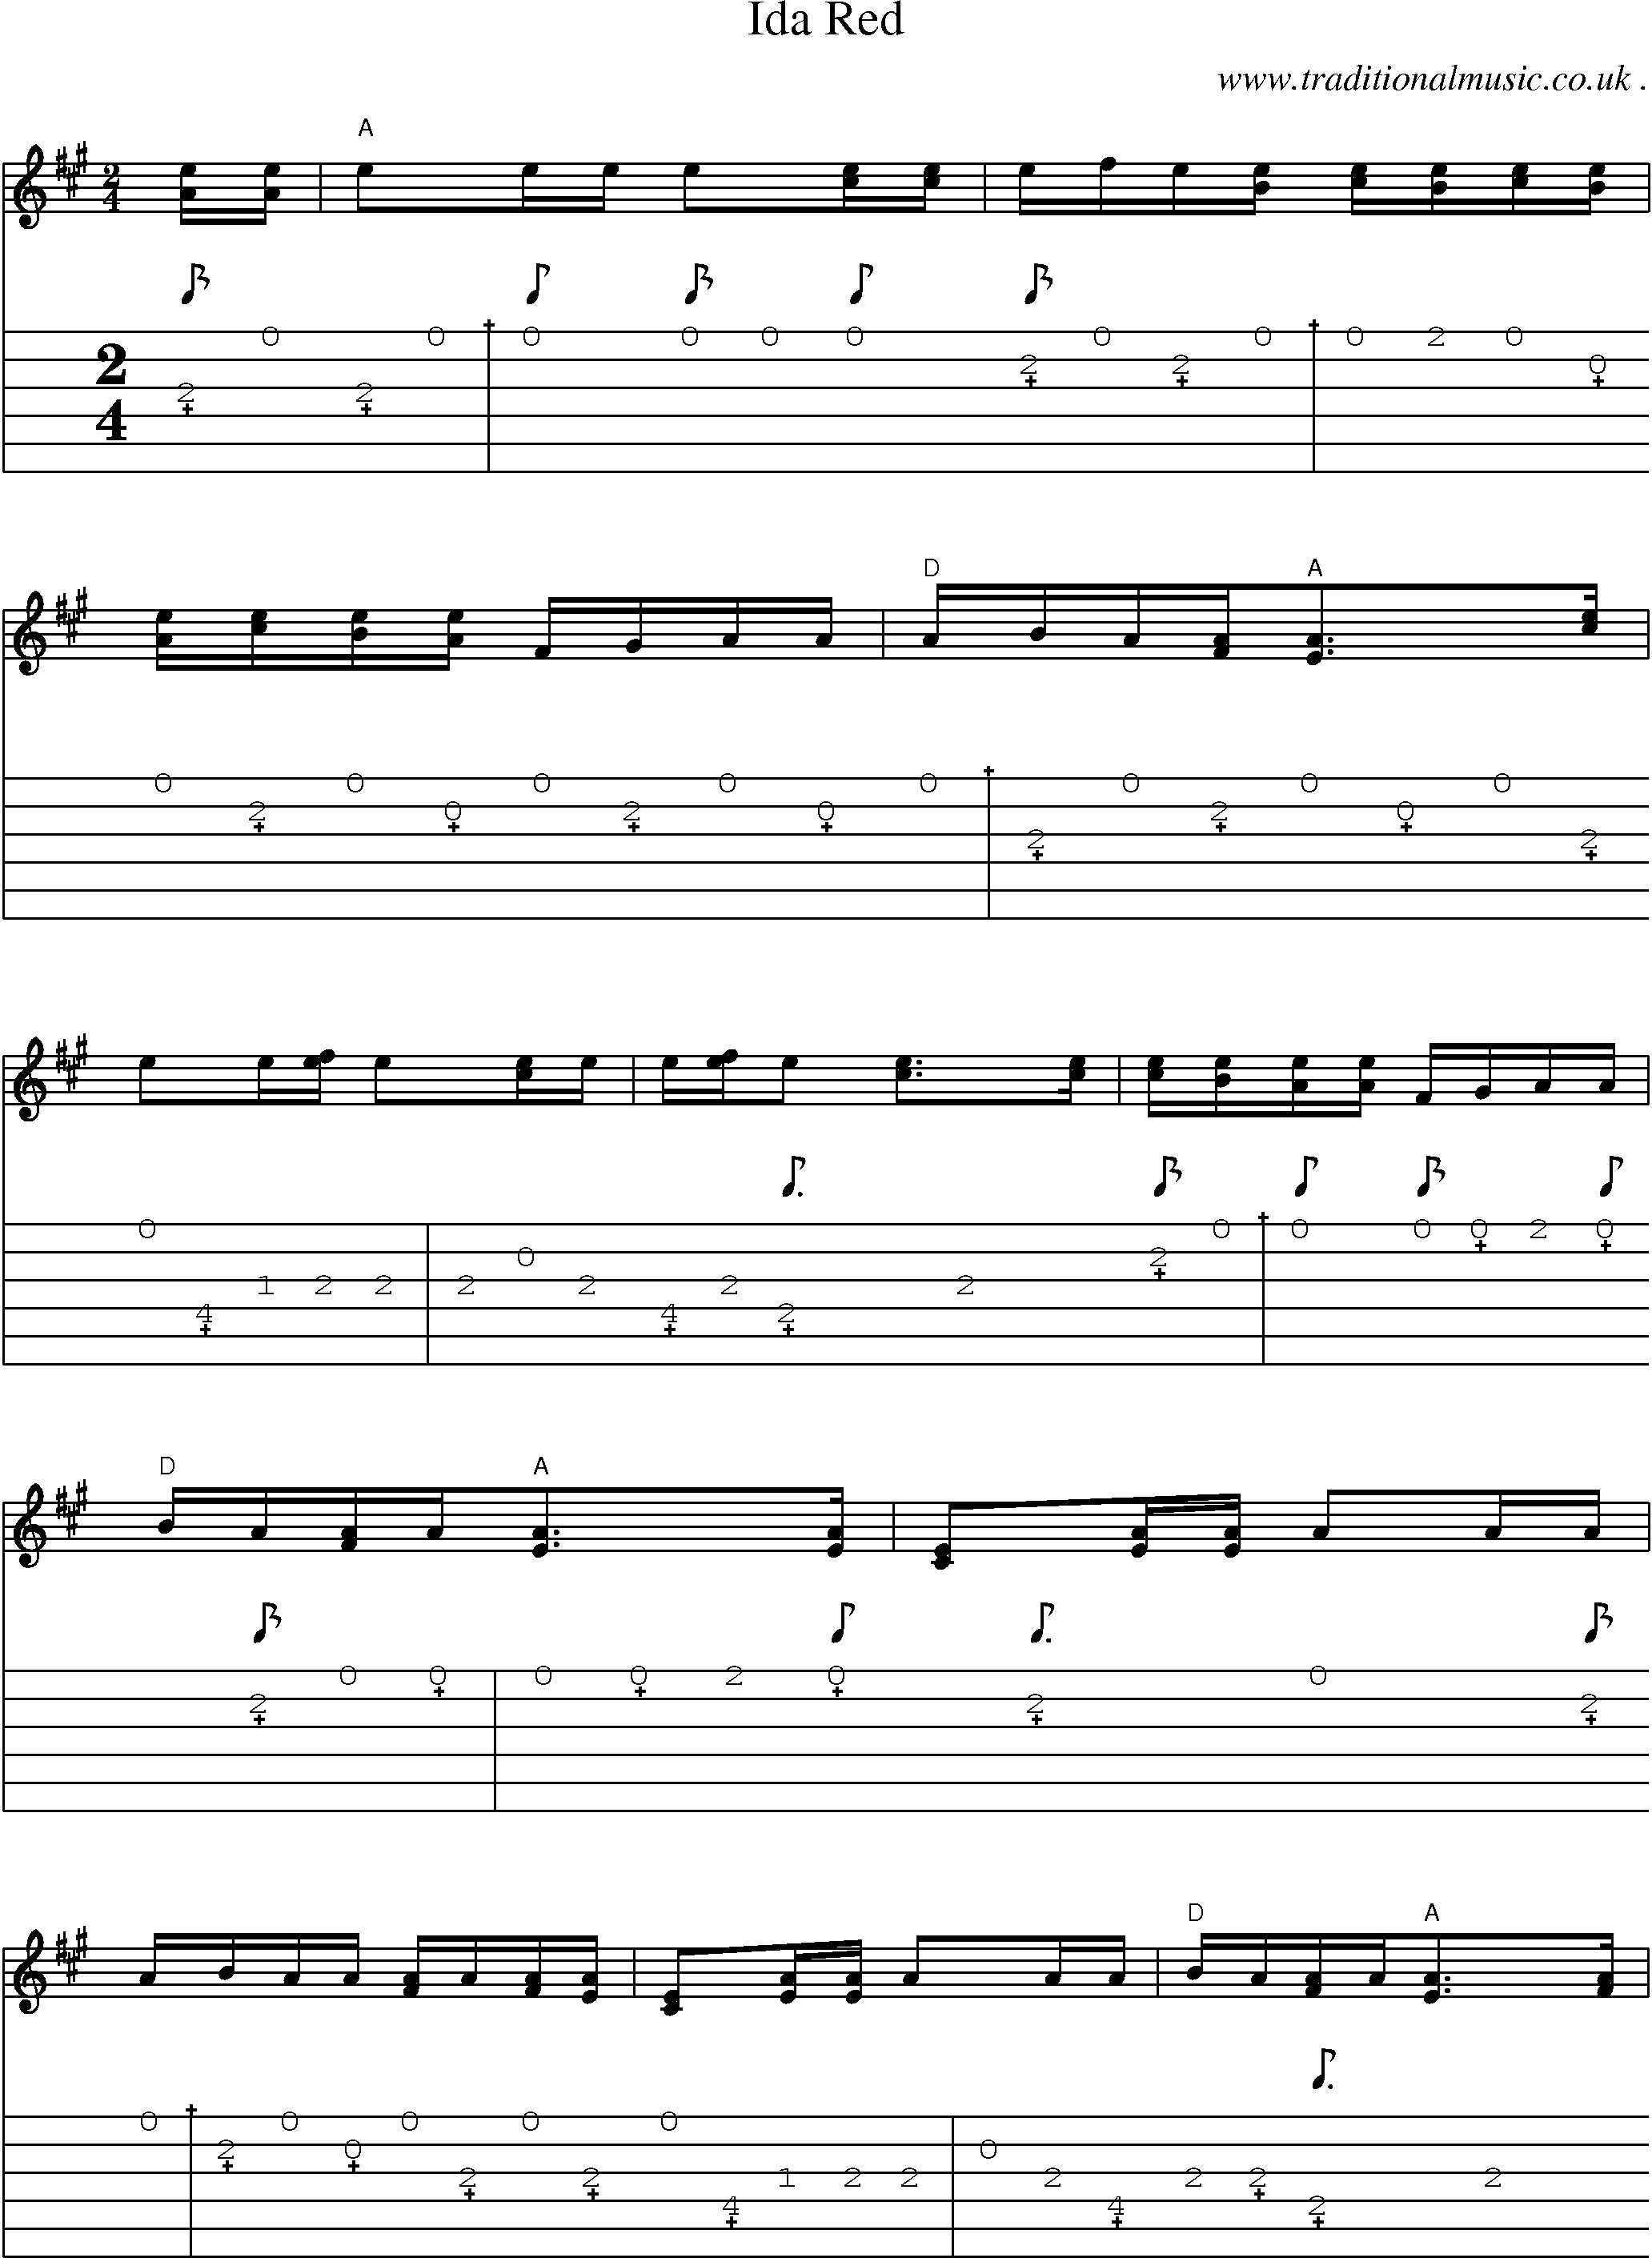 Sheet-Music and Guitar Tabs for Ida Red